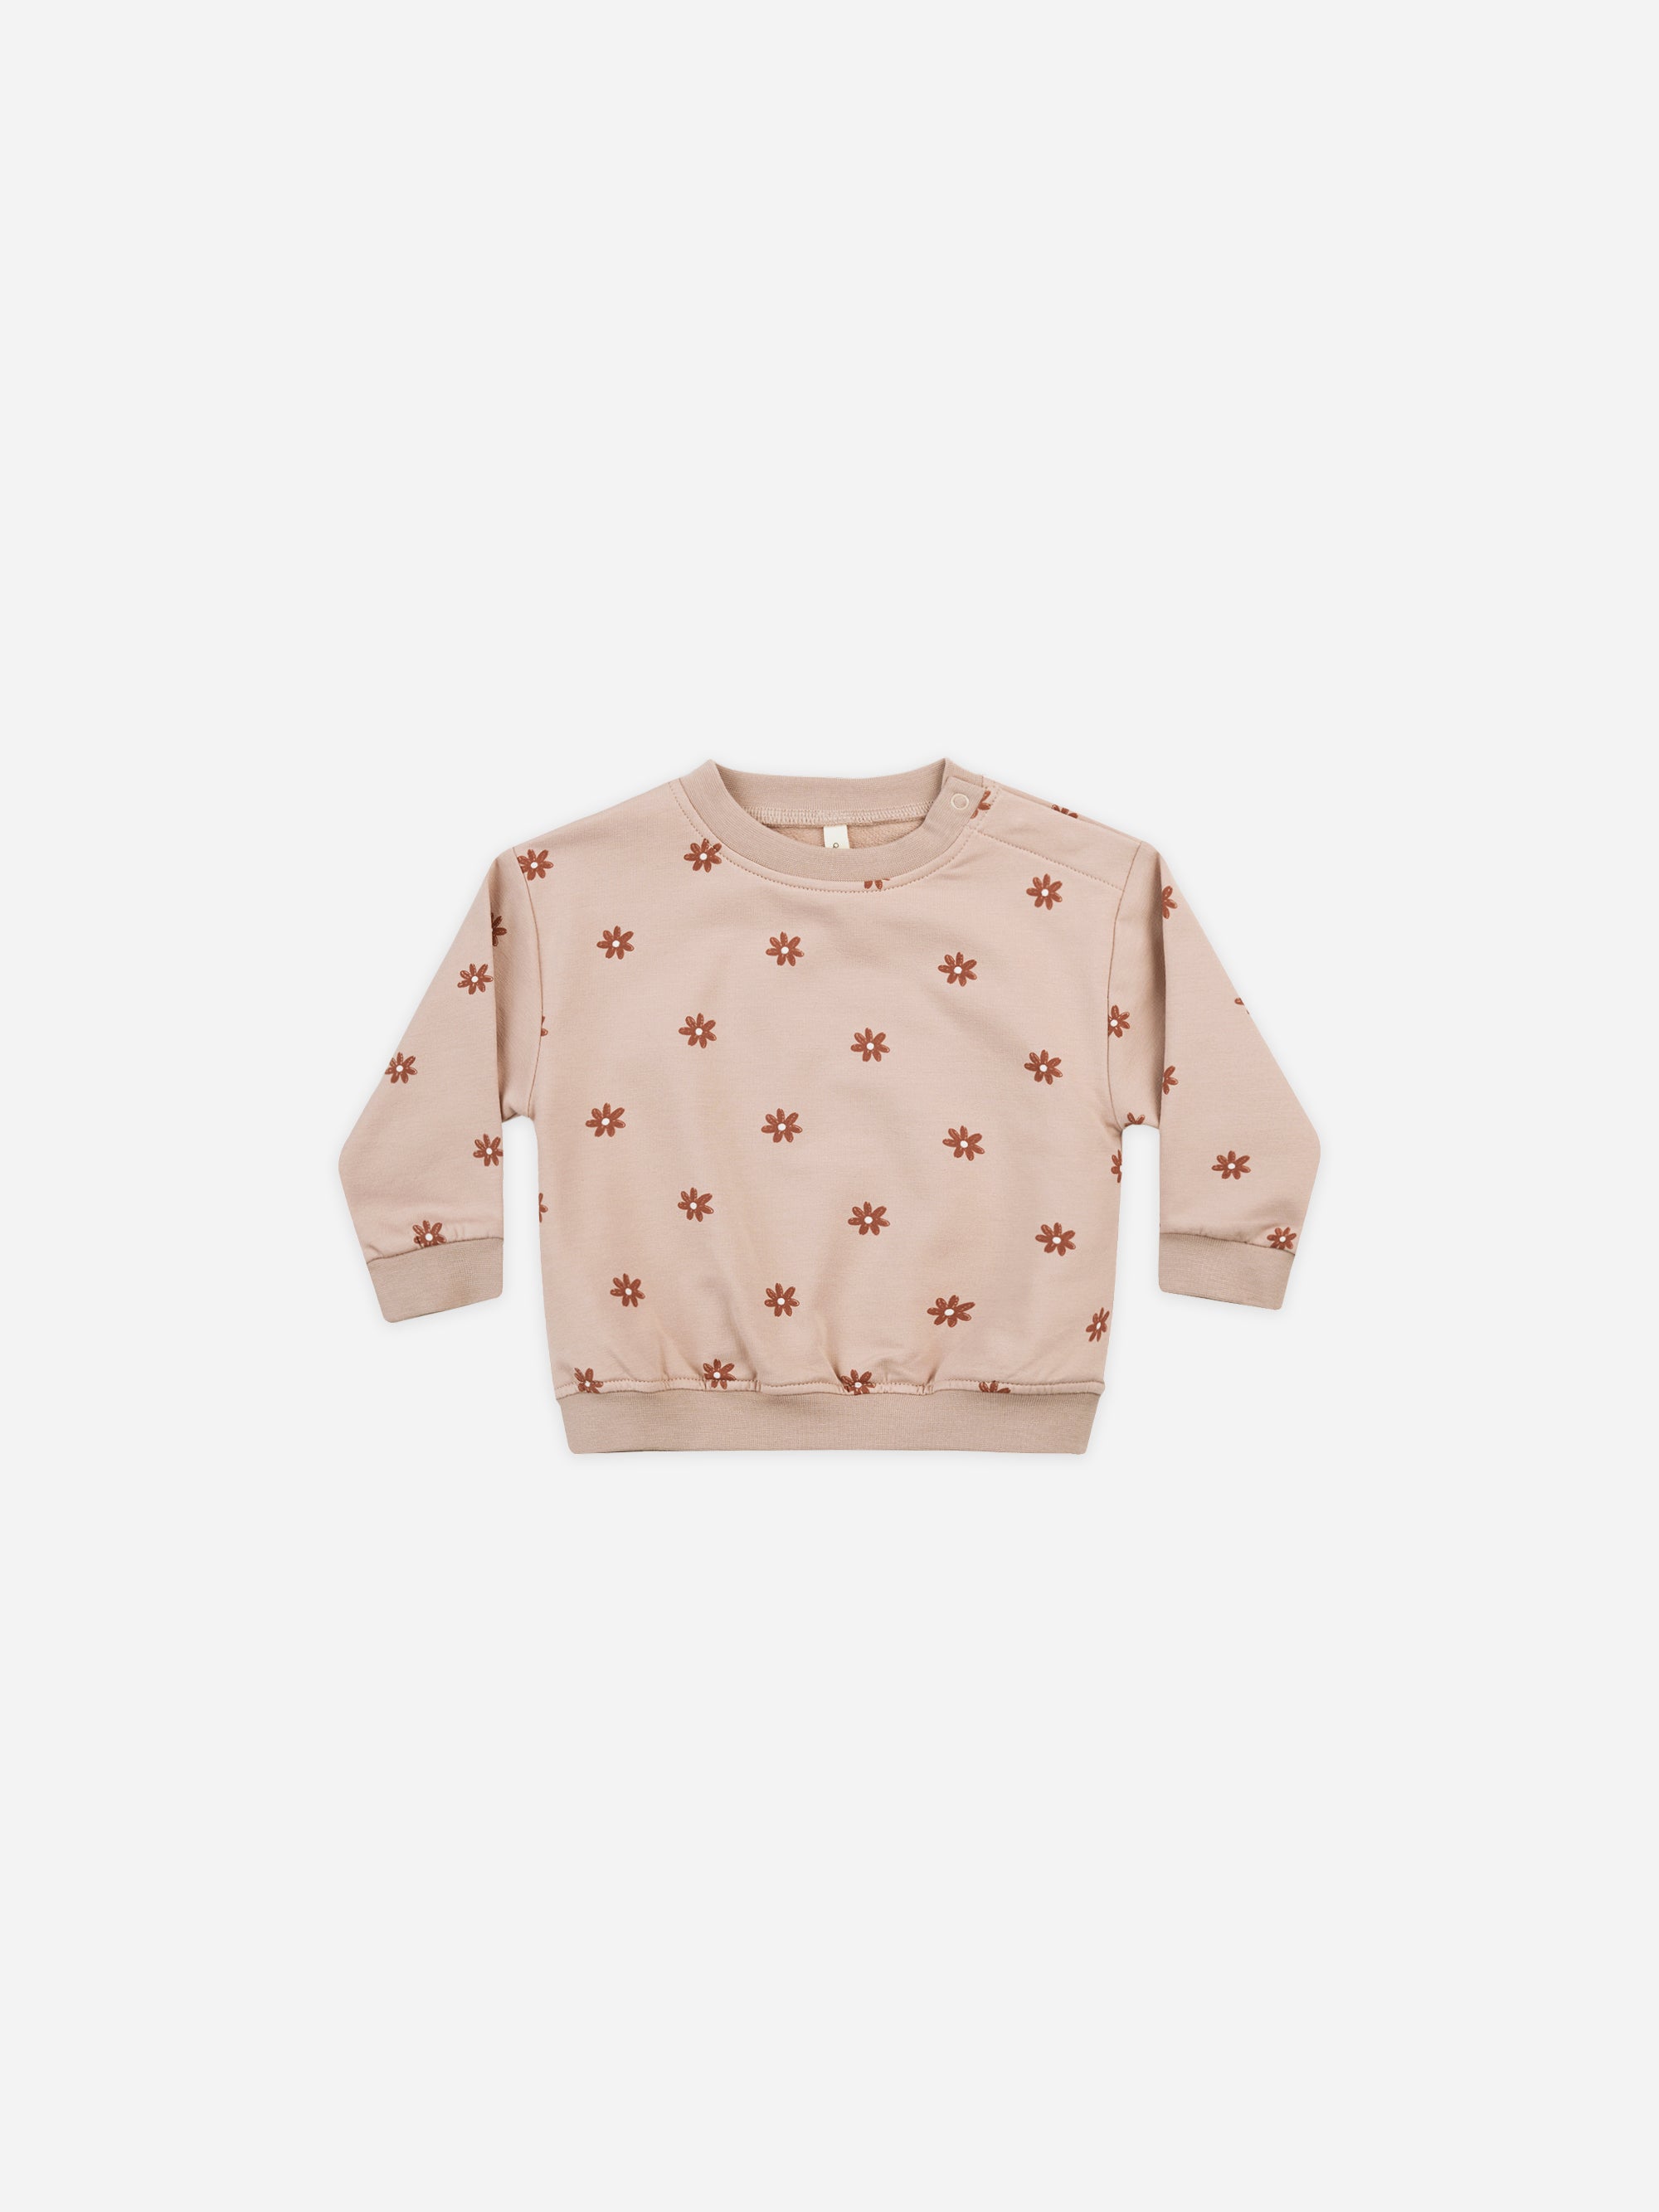 Sweatshirt || Daisies - Rylee + Cru | Kids Clothes | Trendy Baby Clothes | Modern Infant Outfits |